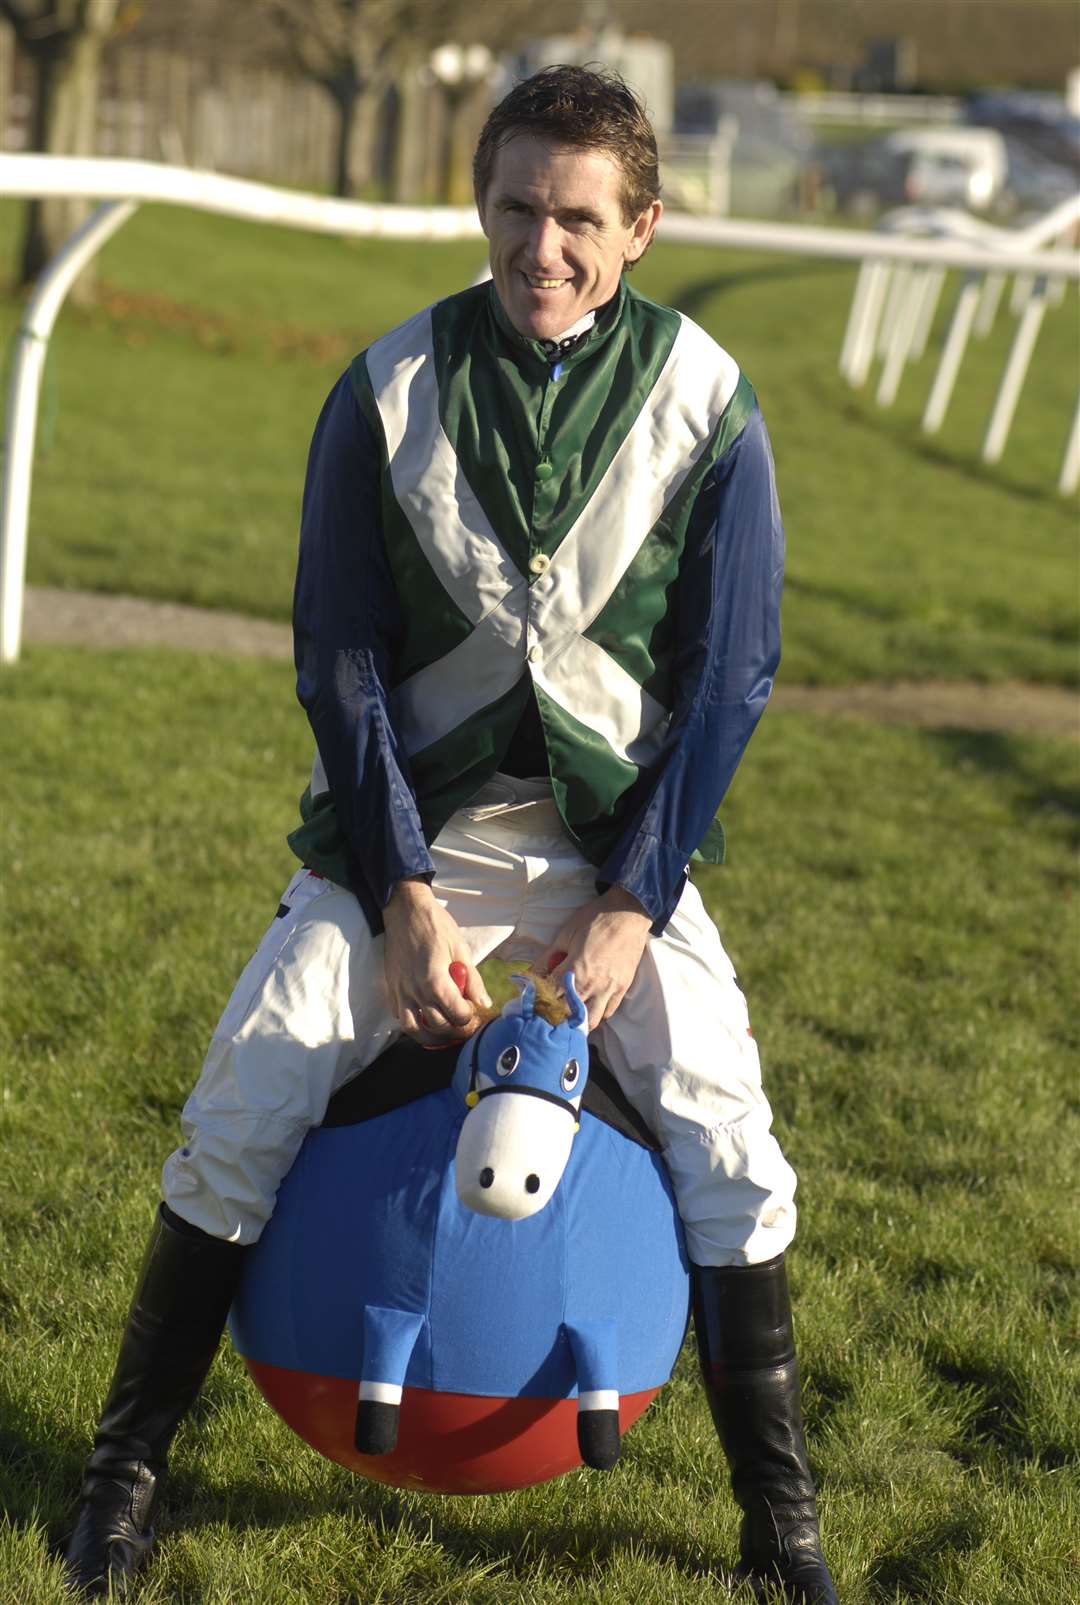 Champion jockey Tony McCoy is more used to riding horses than spacehoppers, but the Northern Irishman took part in a charity event at the track which raised £1,300 for Children in Need in November 2010